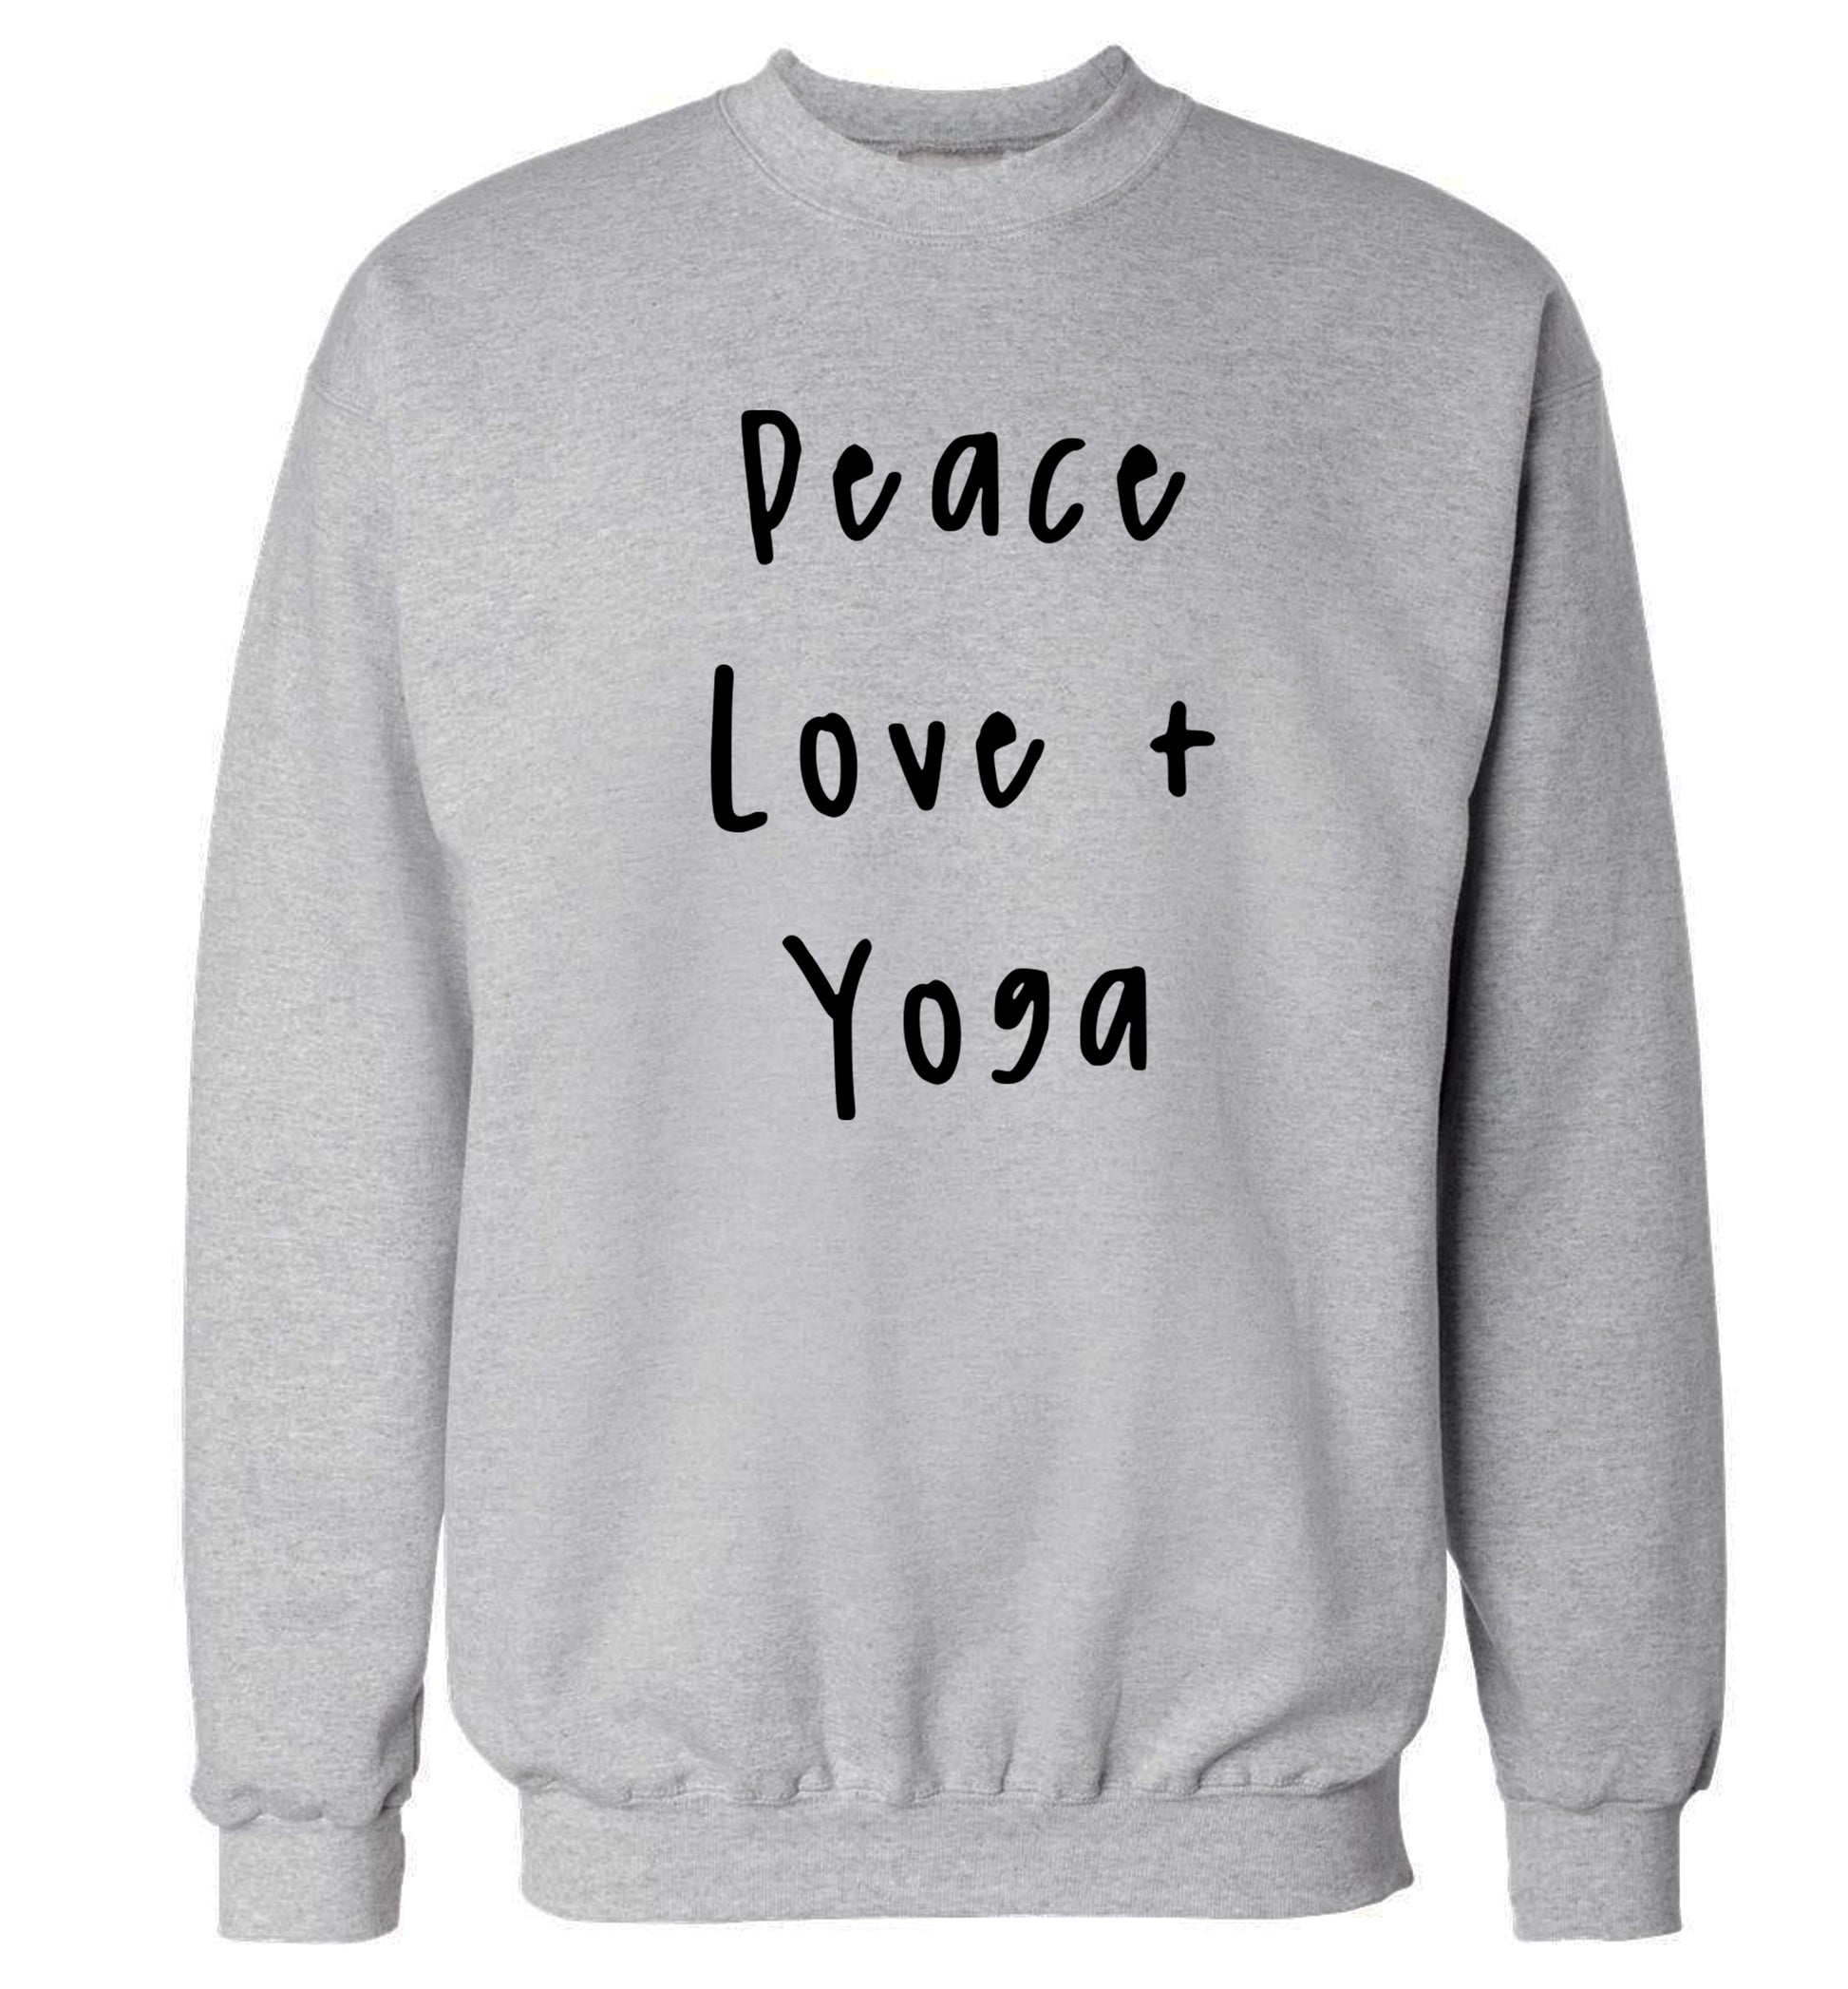 Peace love and yoga Adult's unisex grey Sweater 2XL